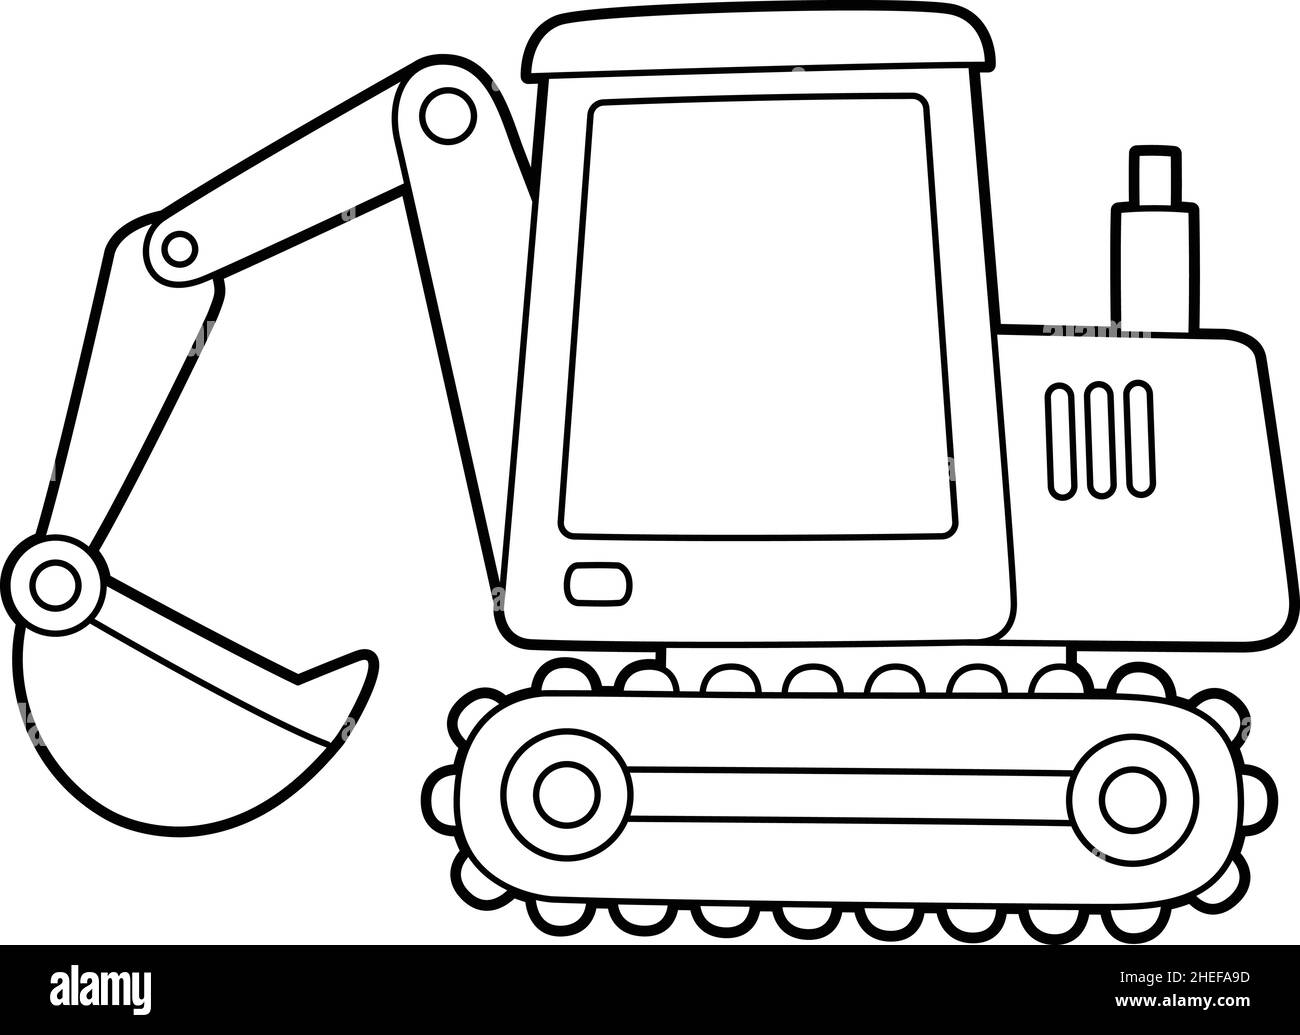 Excavator Coloring Page Isolated for Kids Stock Vector Image & Art ...